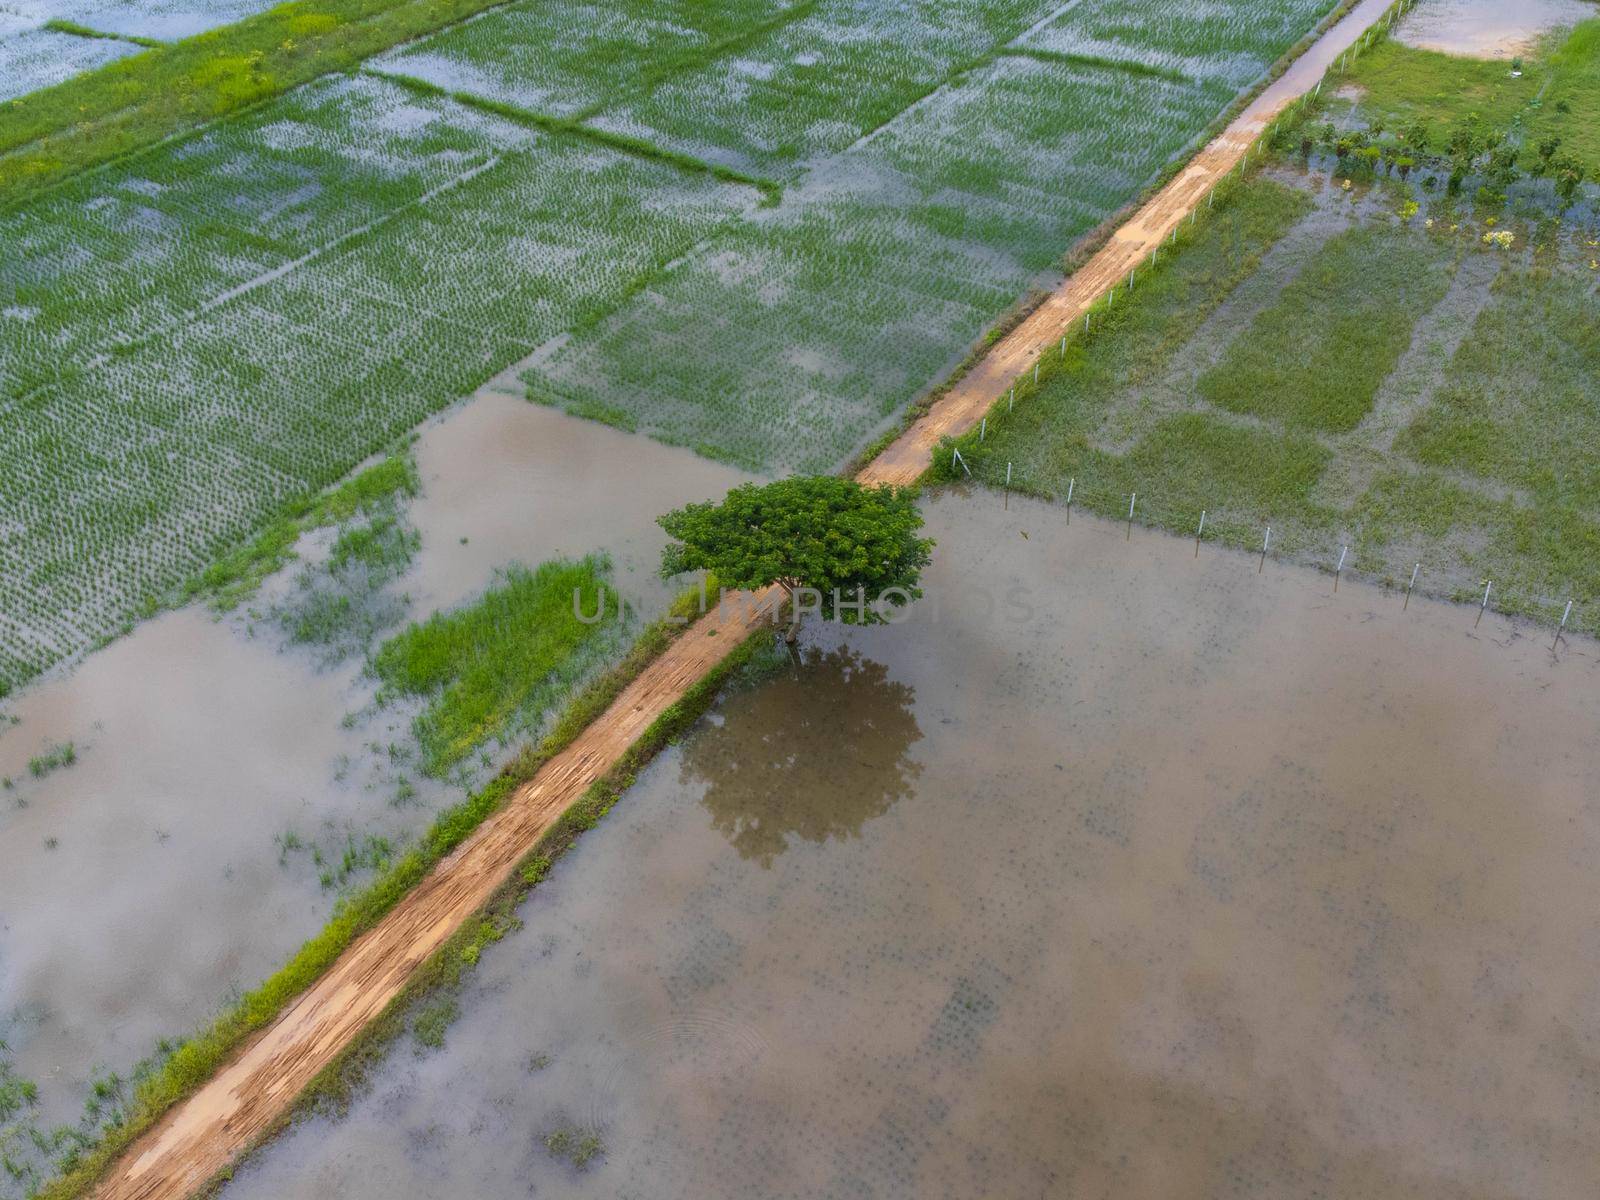 Aerial view of rice fields or agricultural areas affected by rainy season floods. Top view of a river overflowing after heavy rain and flooding of agricultural fields. by TEERASAK